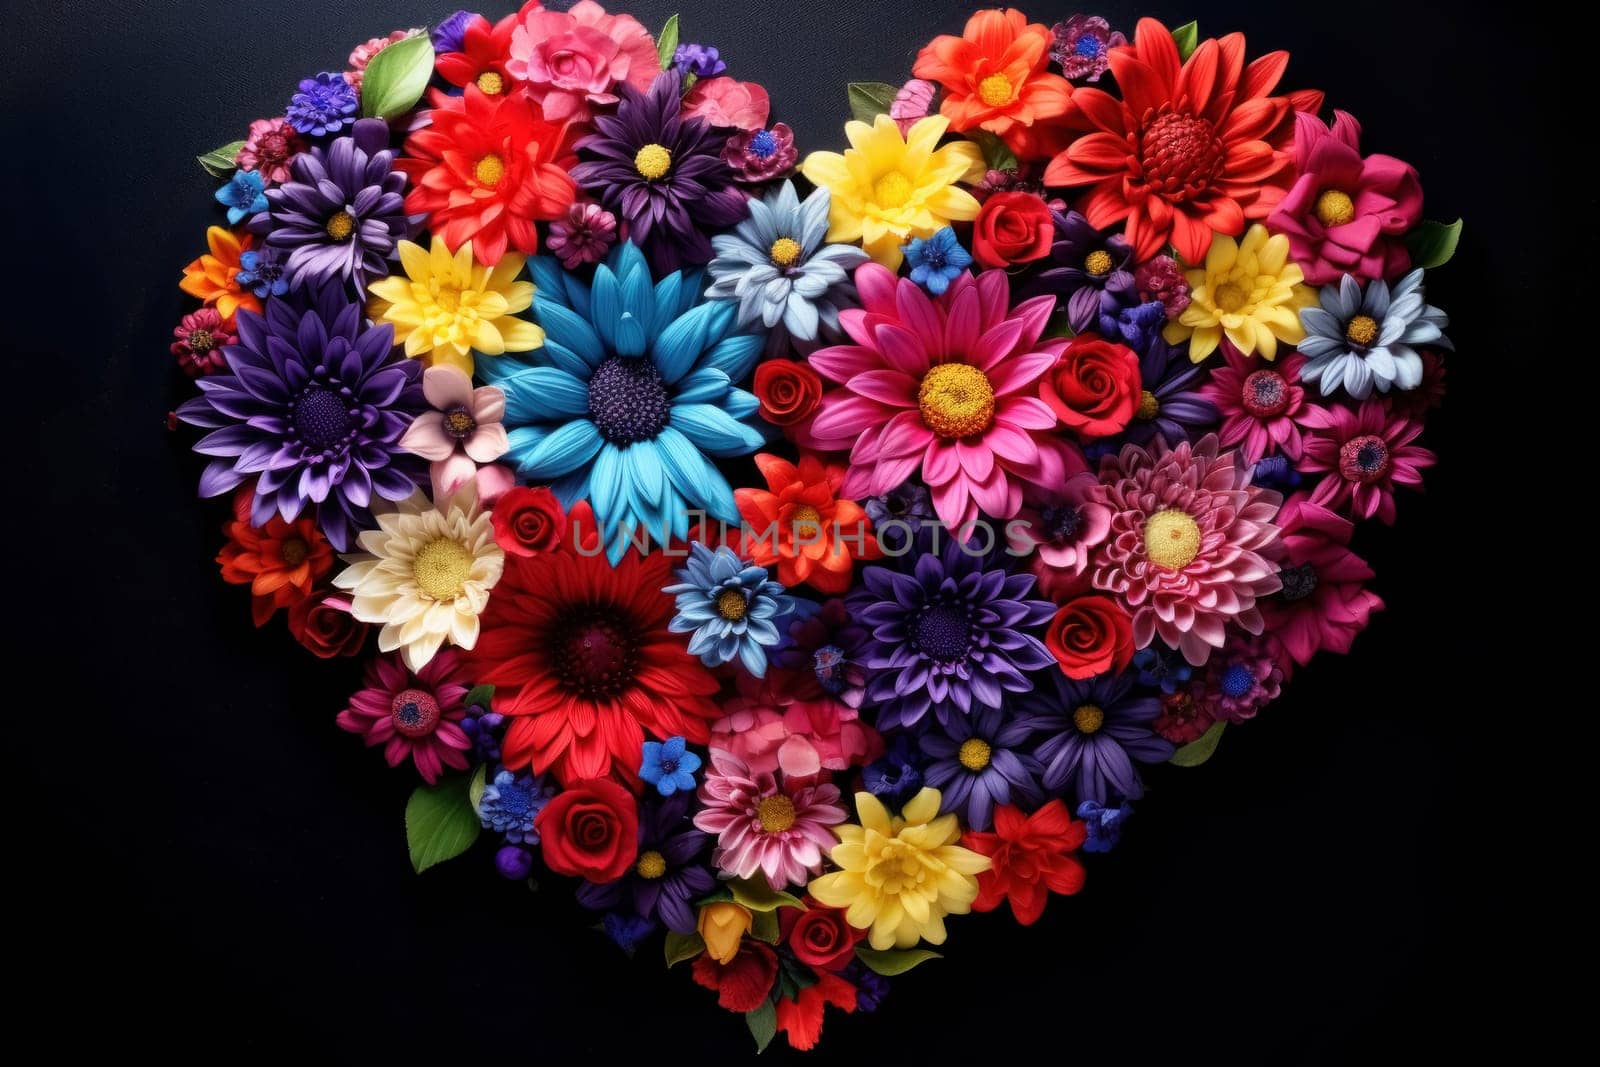 A vivid heart-shaped pattern of diverse blooms on a black backdrop